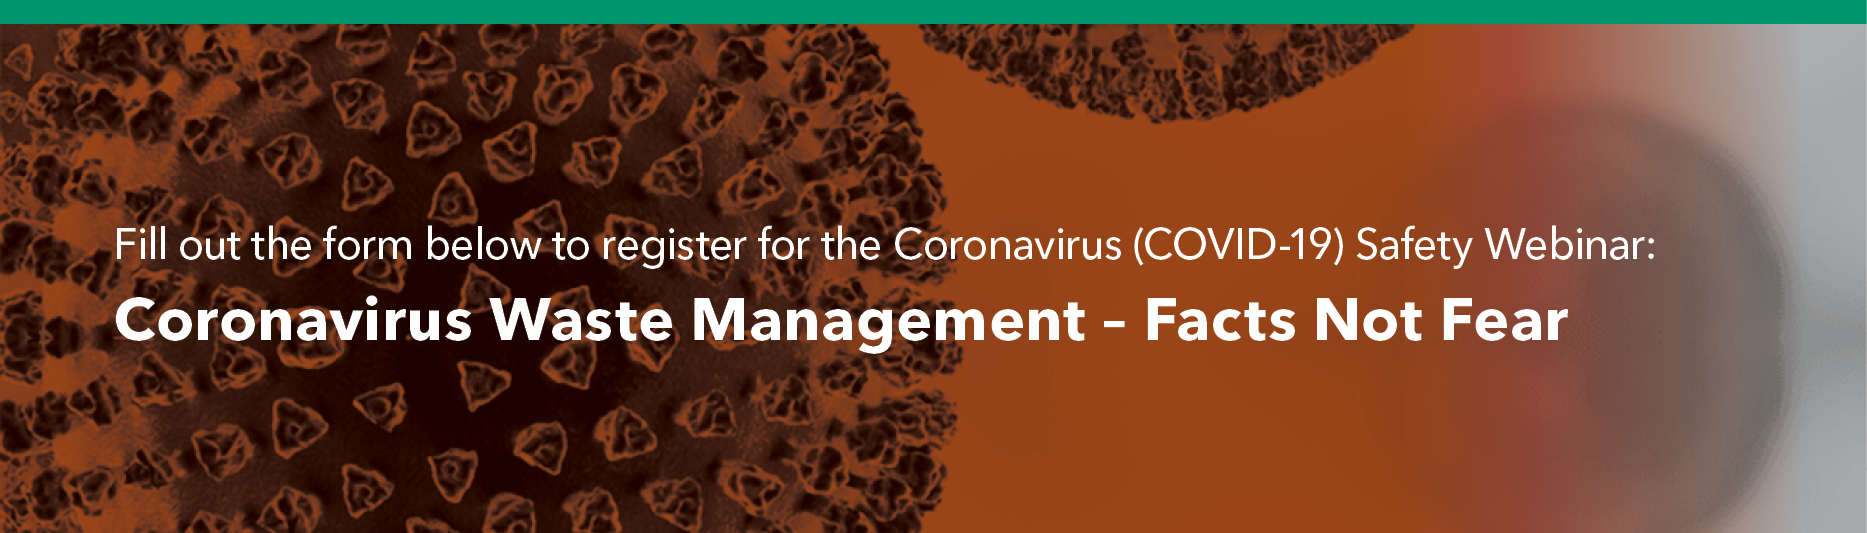 Fill out the form below to register for: Coronavirus Waste Management - Facts Not Fear